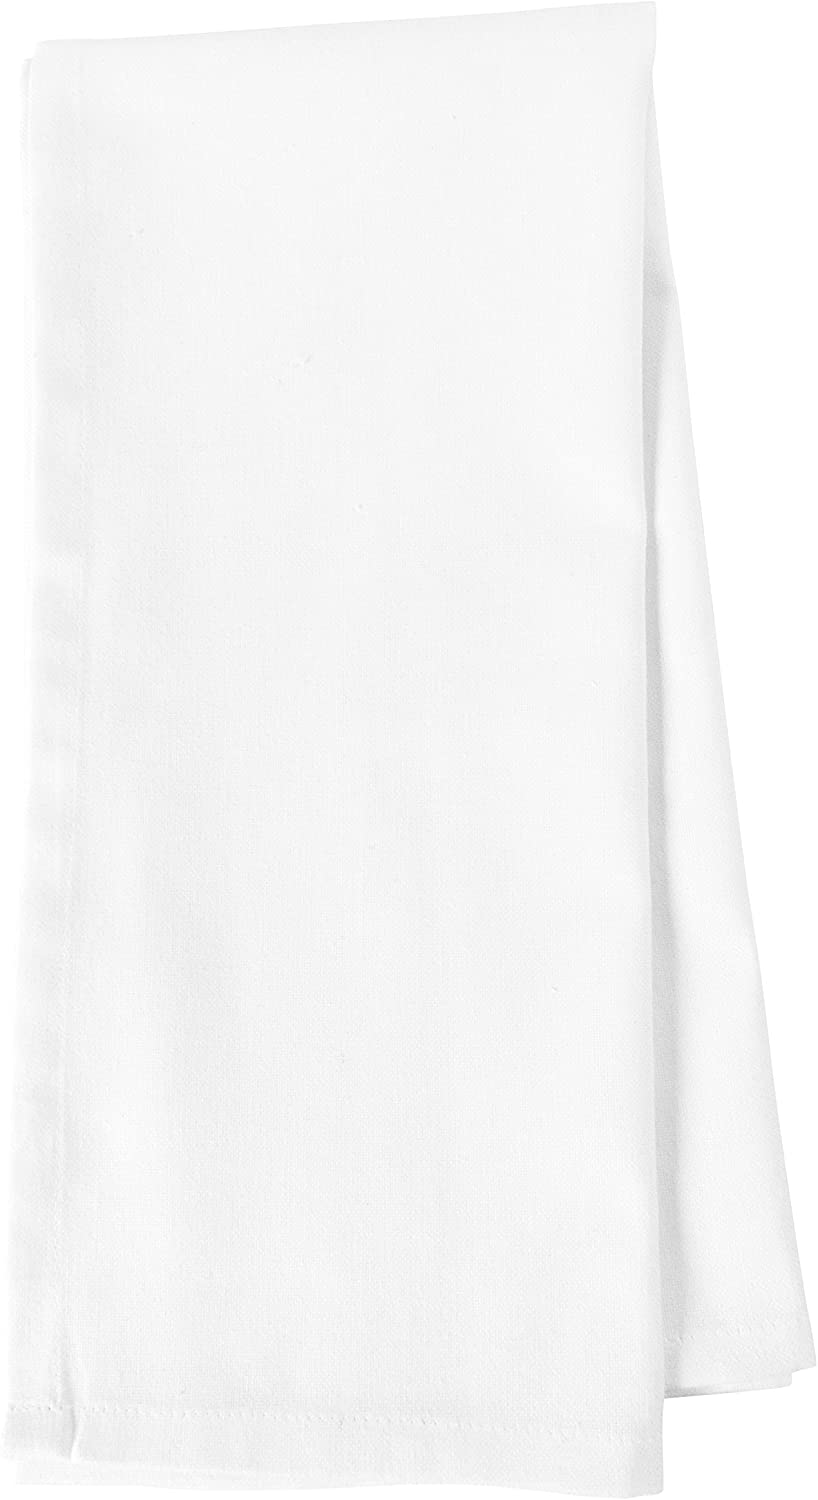 KAF Home White Kitchen Towels, 10 Pack, 100% Cotton - 20 x 30, Soft and  Functional Multi-Purpose, Baking, Cooking, Cleaning, Printing,  Monogramming